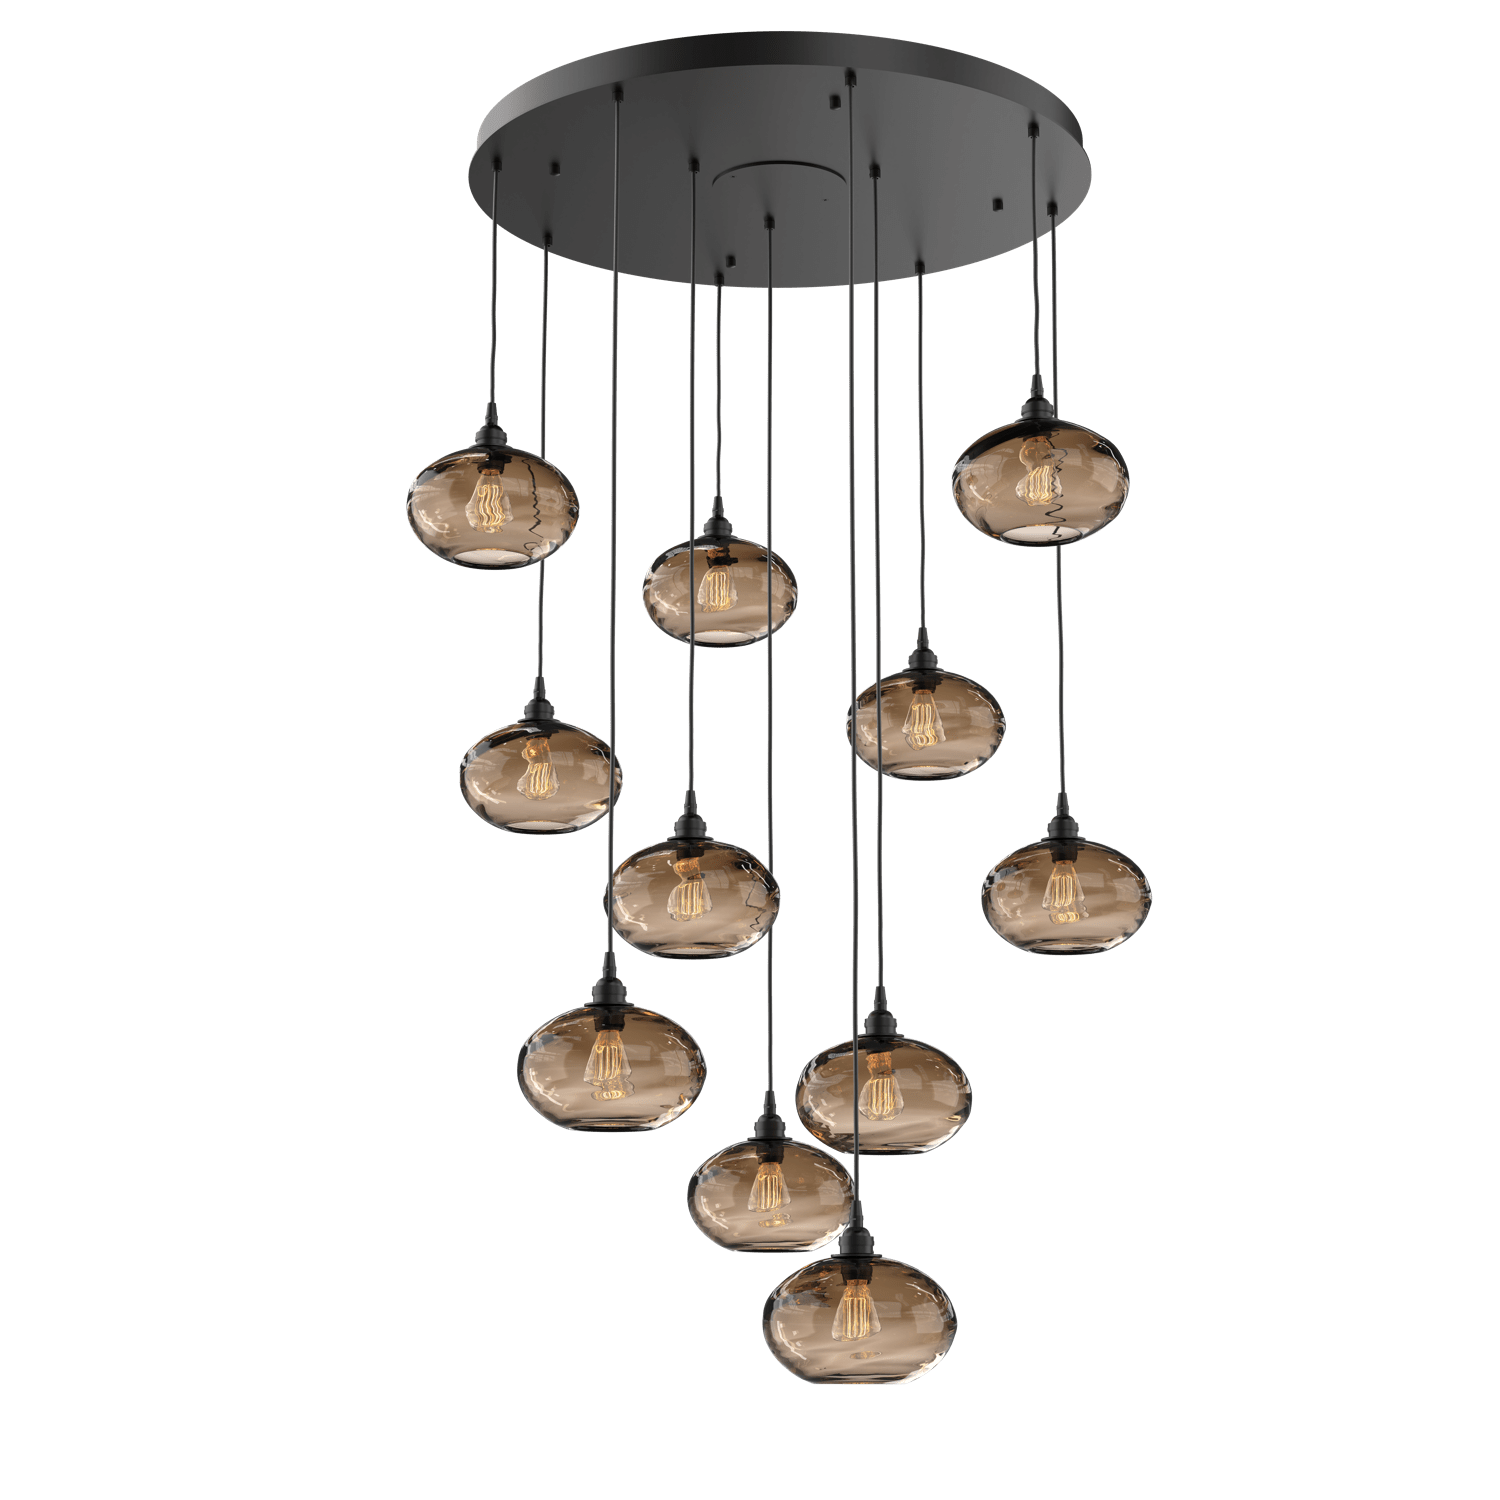 CHB0036-11-MB-OB-Hammerton-Studio-Optic-Blown-Glass-Coppa-11-light-round-pendant-chandelier-with-matte-black-finish-and-optic-bronze-blown-glass-shades-and-incandescent-lamping